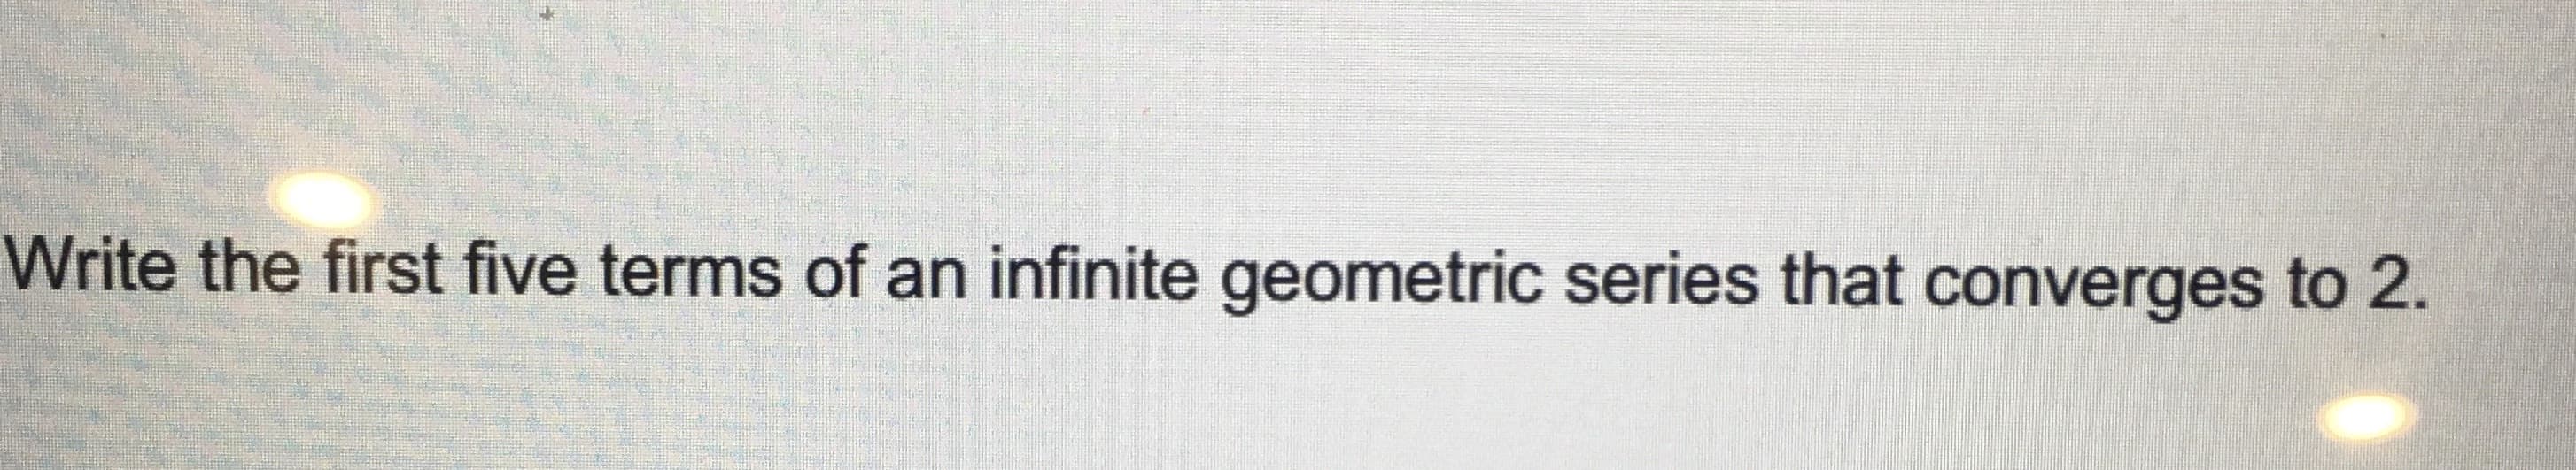 Write the first five terms of an infinite geometric series that converges to 2.
